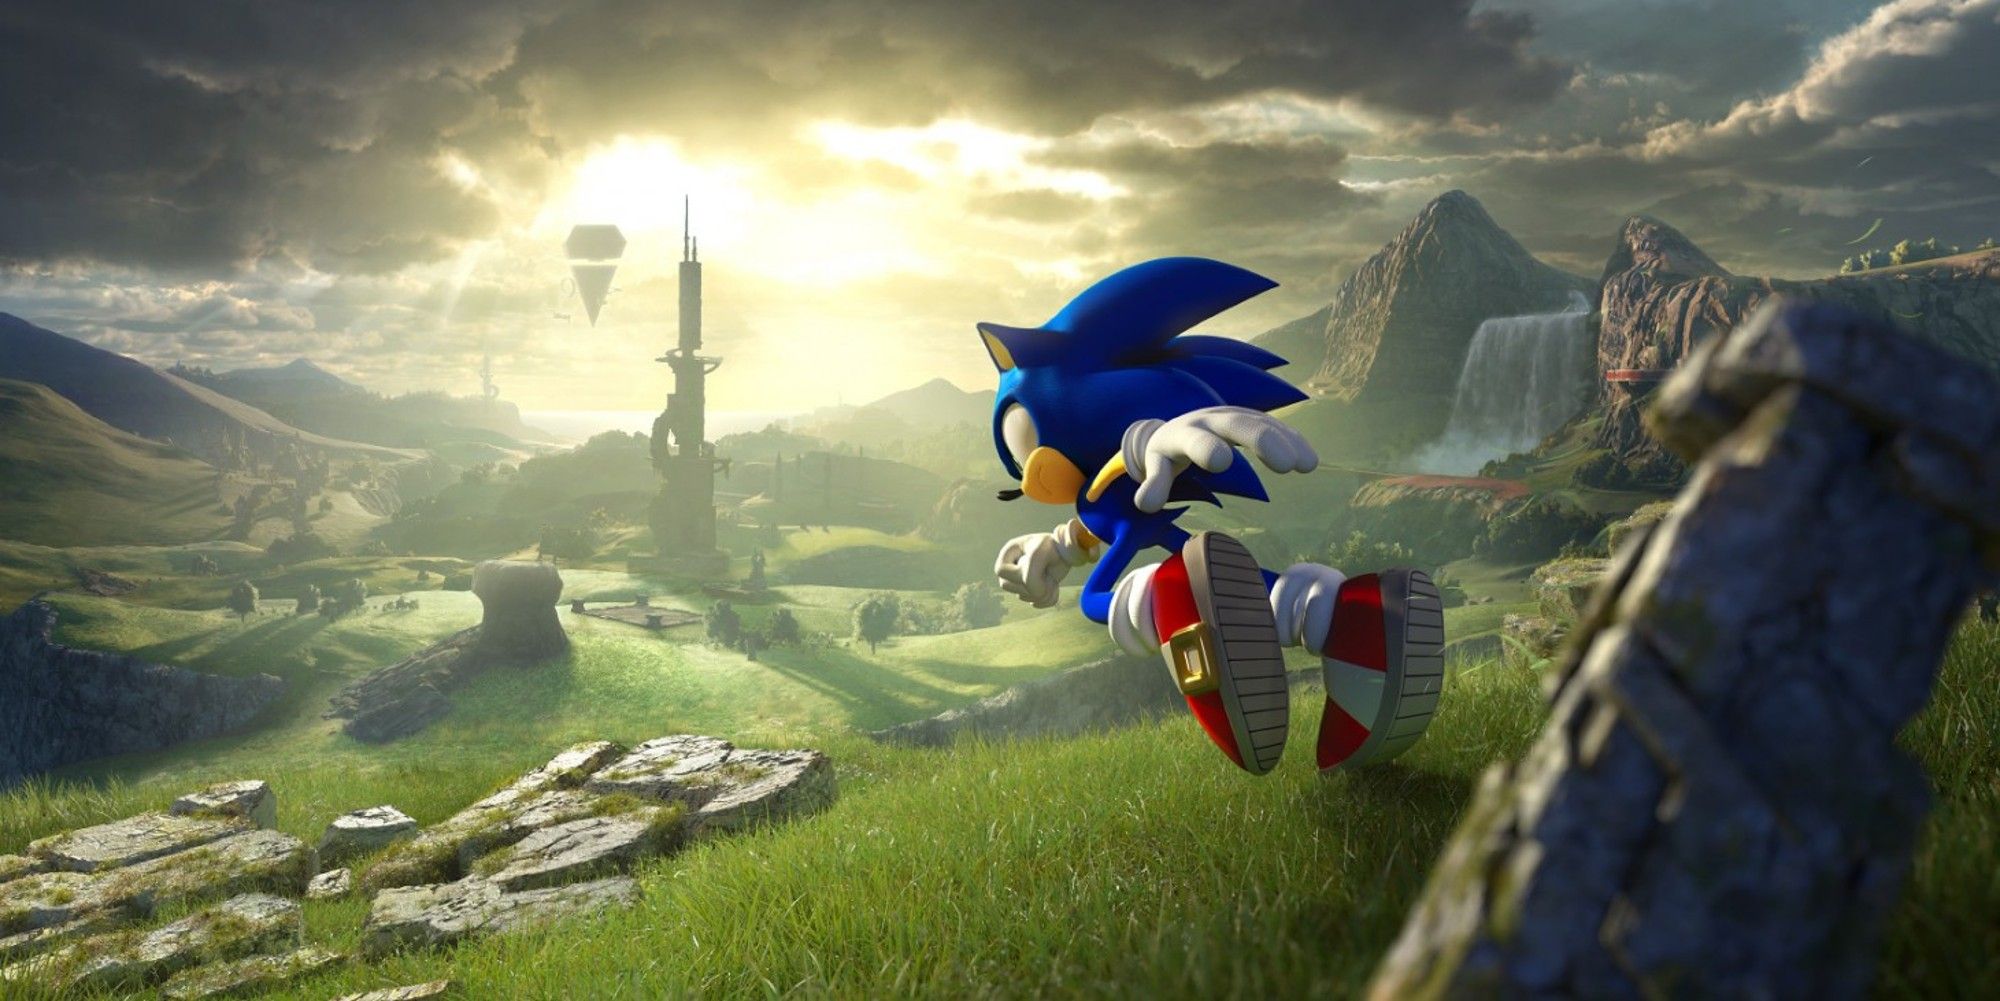 Sonic Frontiers Release Date Moved Back To December 3 On SteamDB